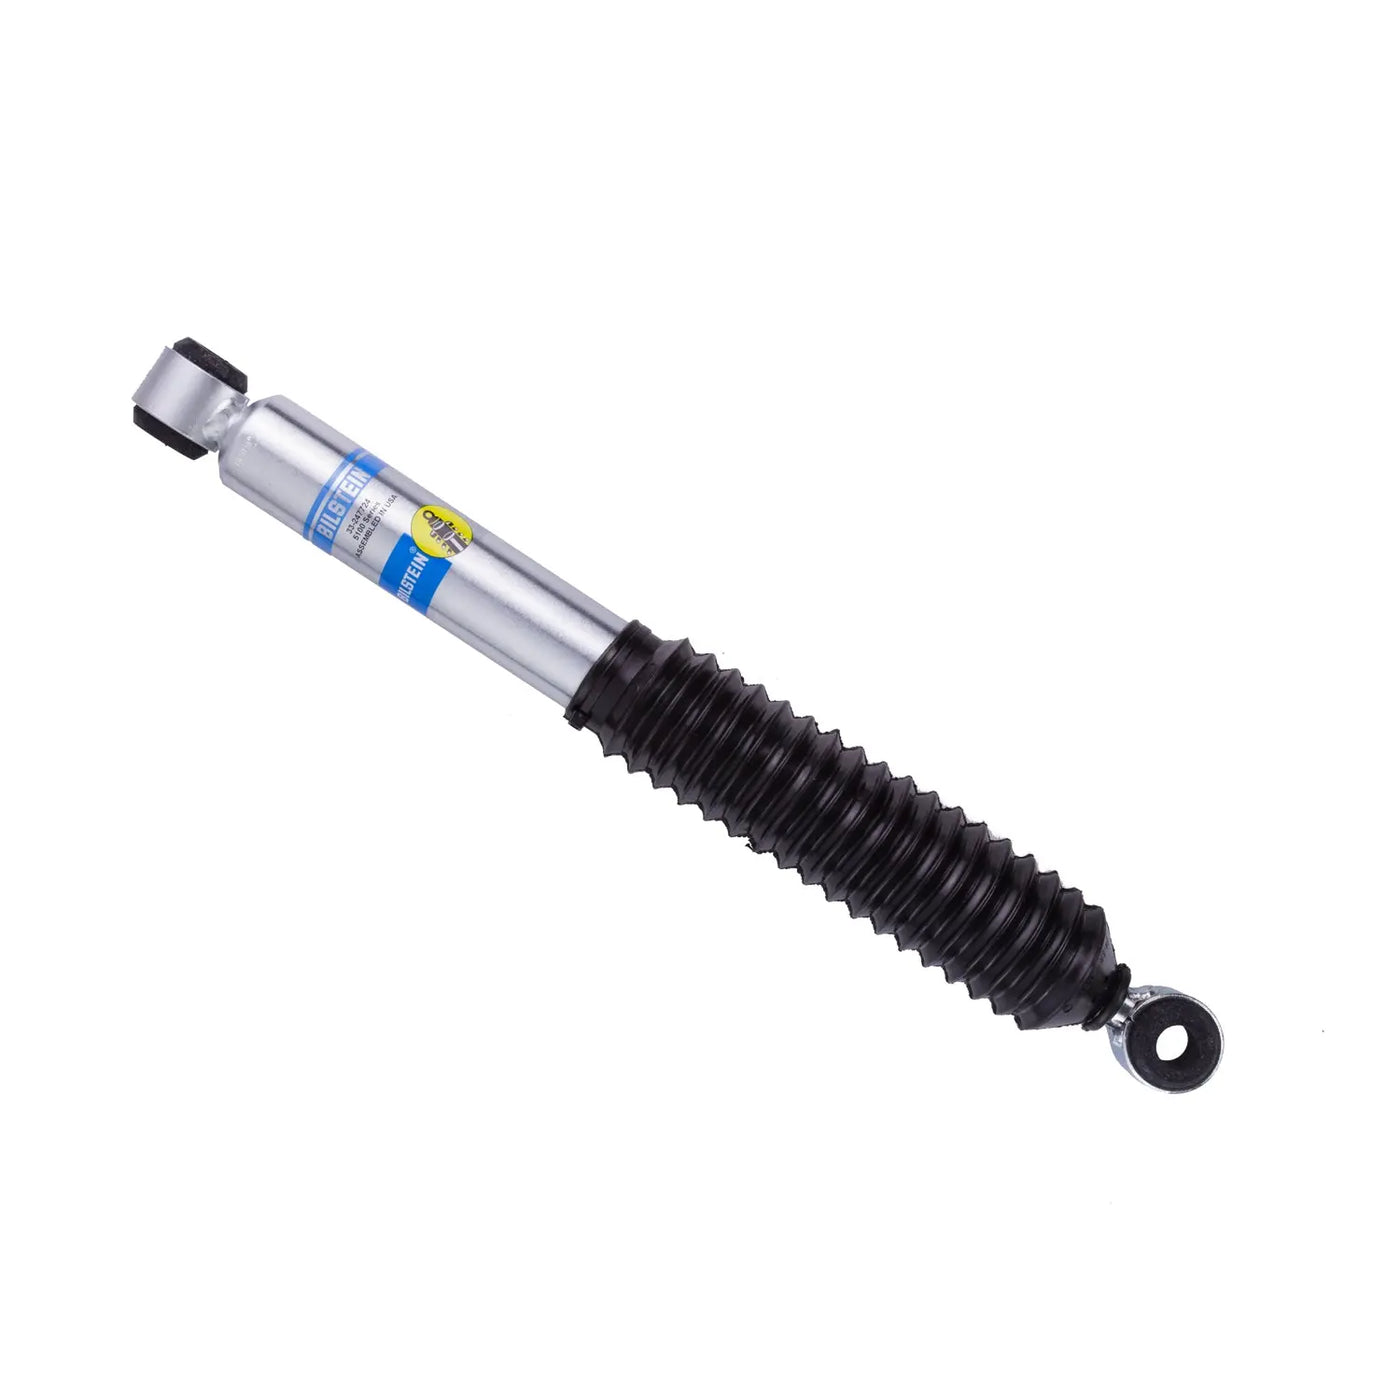 Bilstein 5100 Rear Shocks for Toyota Tacoma 1996-2004 (pair) - Wheel Every Weekend